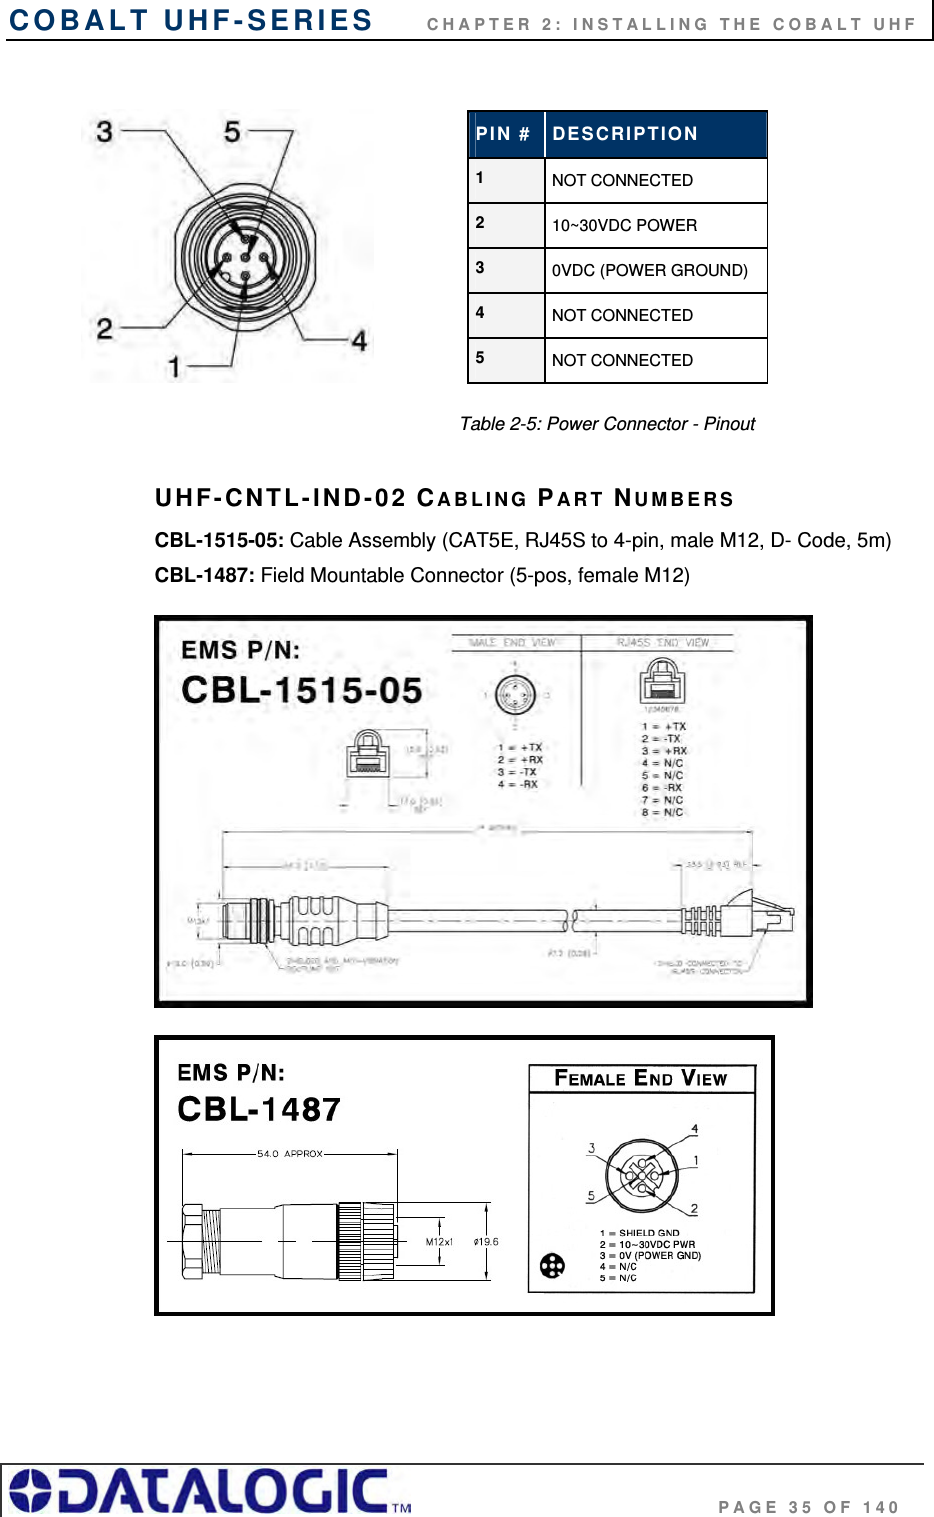 COBALT UHF-SERIES      CHAPTER 2: INSTALLING THE COBALT UHF                                     PAGE 35 OF 140                                                                   Table 2-5: Power Connector - Pinout   UHF-CNTL-IND-02 CABLING PART NUMBERS CBL-1515-05: Cable Assembly (CAT5E, RJ45S to 4-pin, male M12, D- Code, 5m) CBL-1487: Field Mountable Connector (5-pos, female M12)     PIN #  DESCRIPTION 1  NOT CONNECTED 2  10~30VDC POWER 3  0VDC (POWER GROUND) 4  NOT CONNECTED 5  NOT CONNECTED 